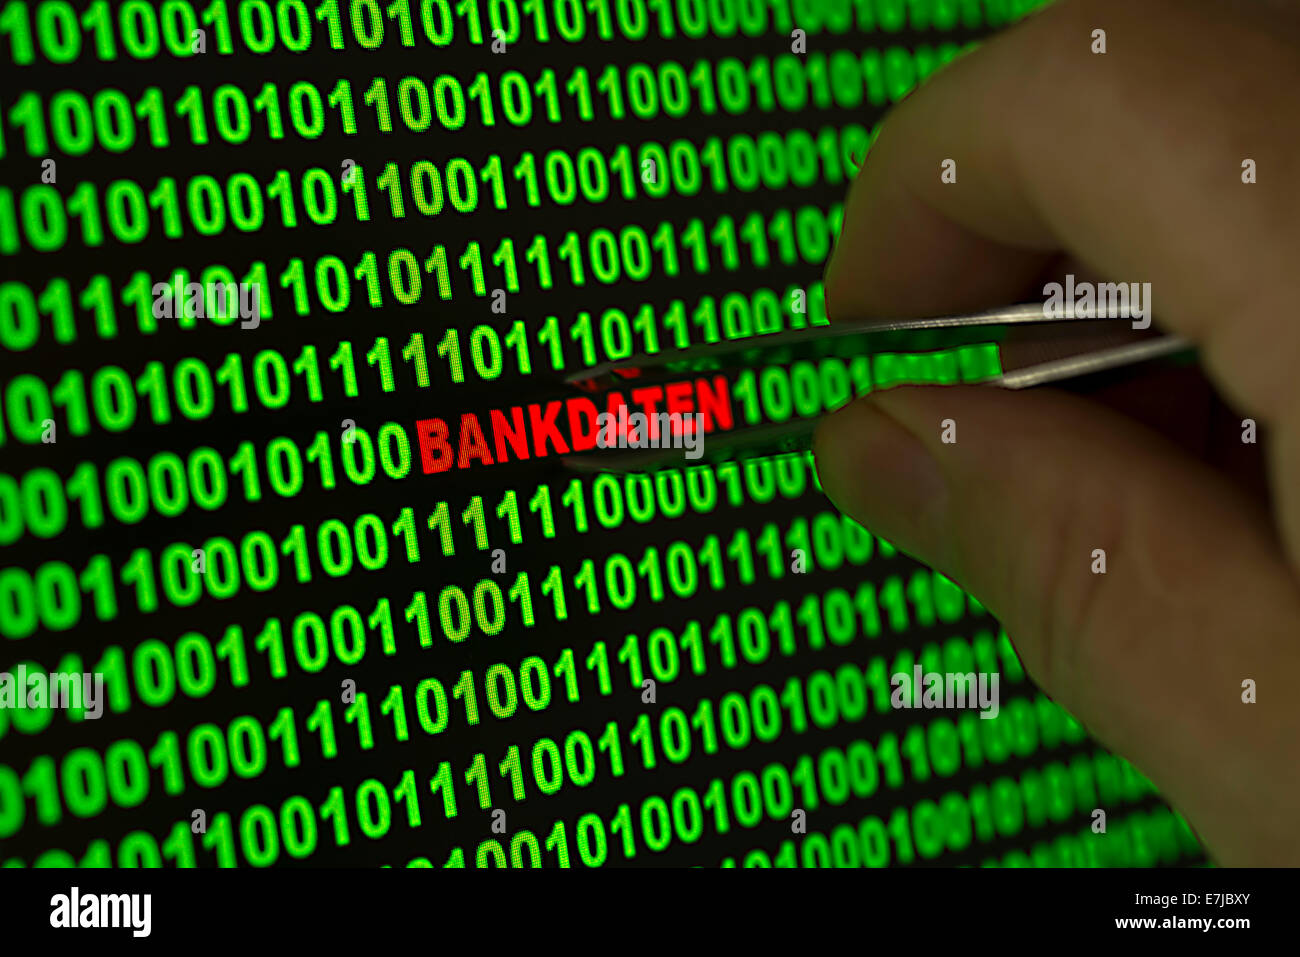 Hand reaching for the word 'Bankdaten', German for 'Banking information' with tweezers in a binary code Stock Photo